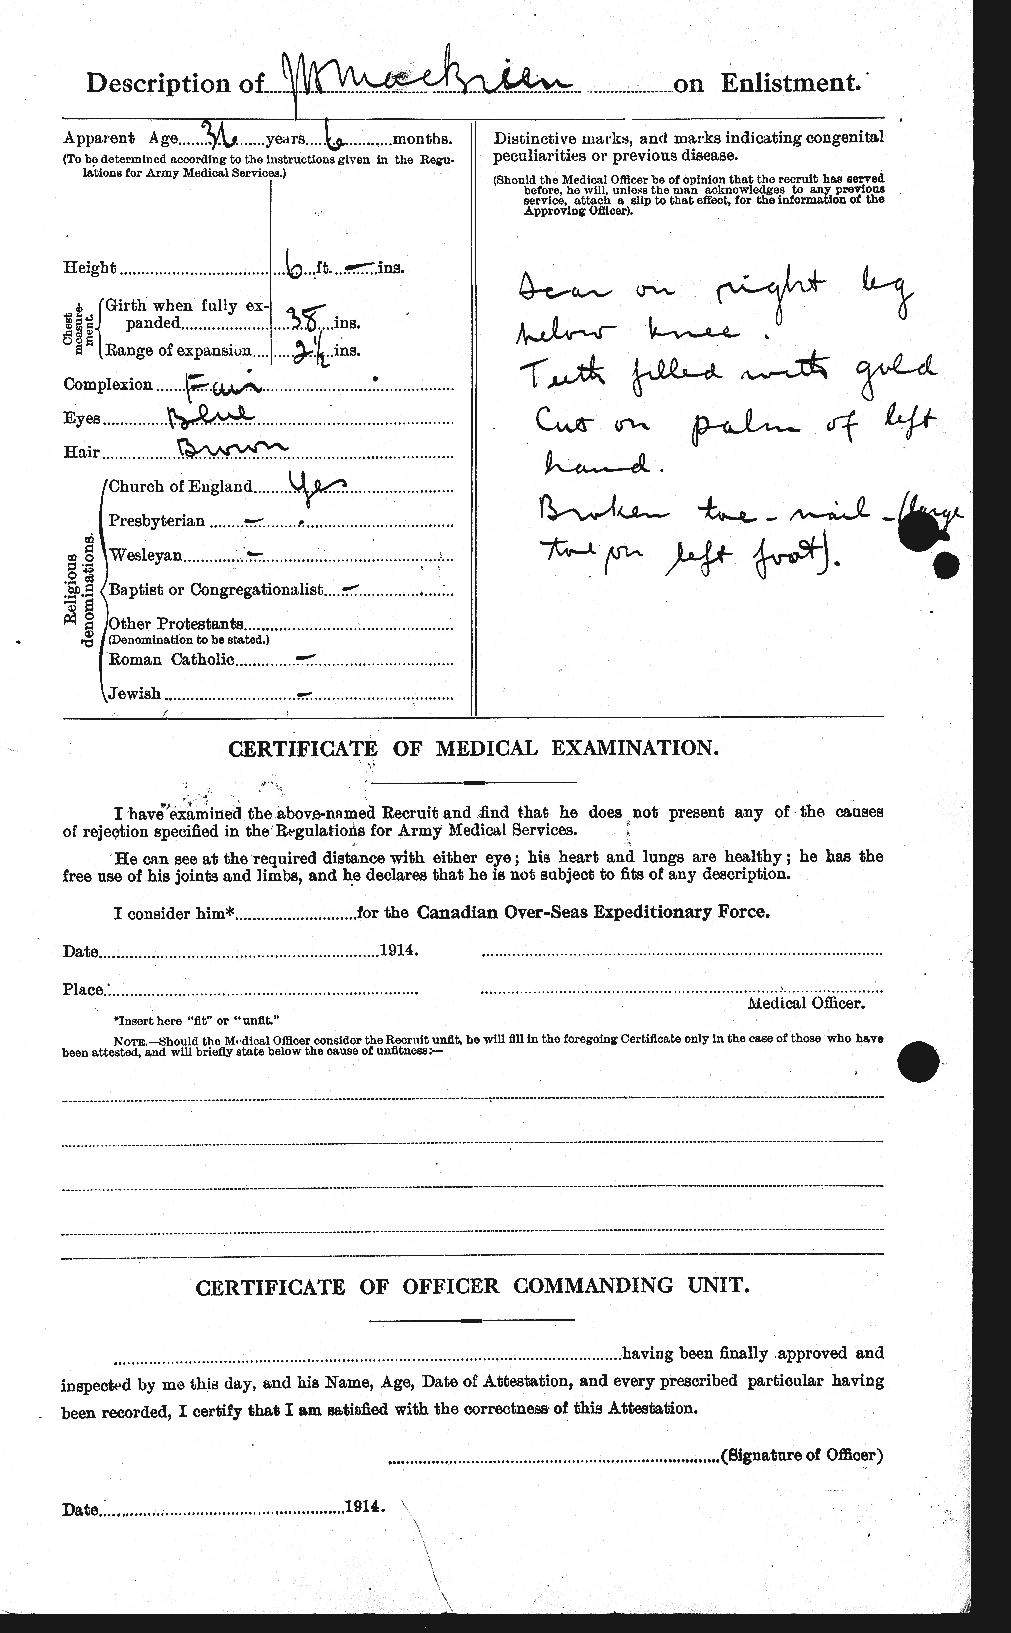 Personnel Records of the First World War - CEF 131799b